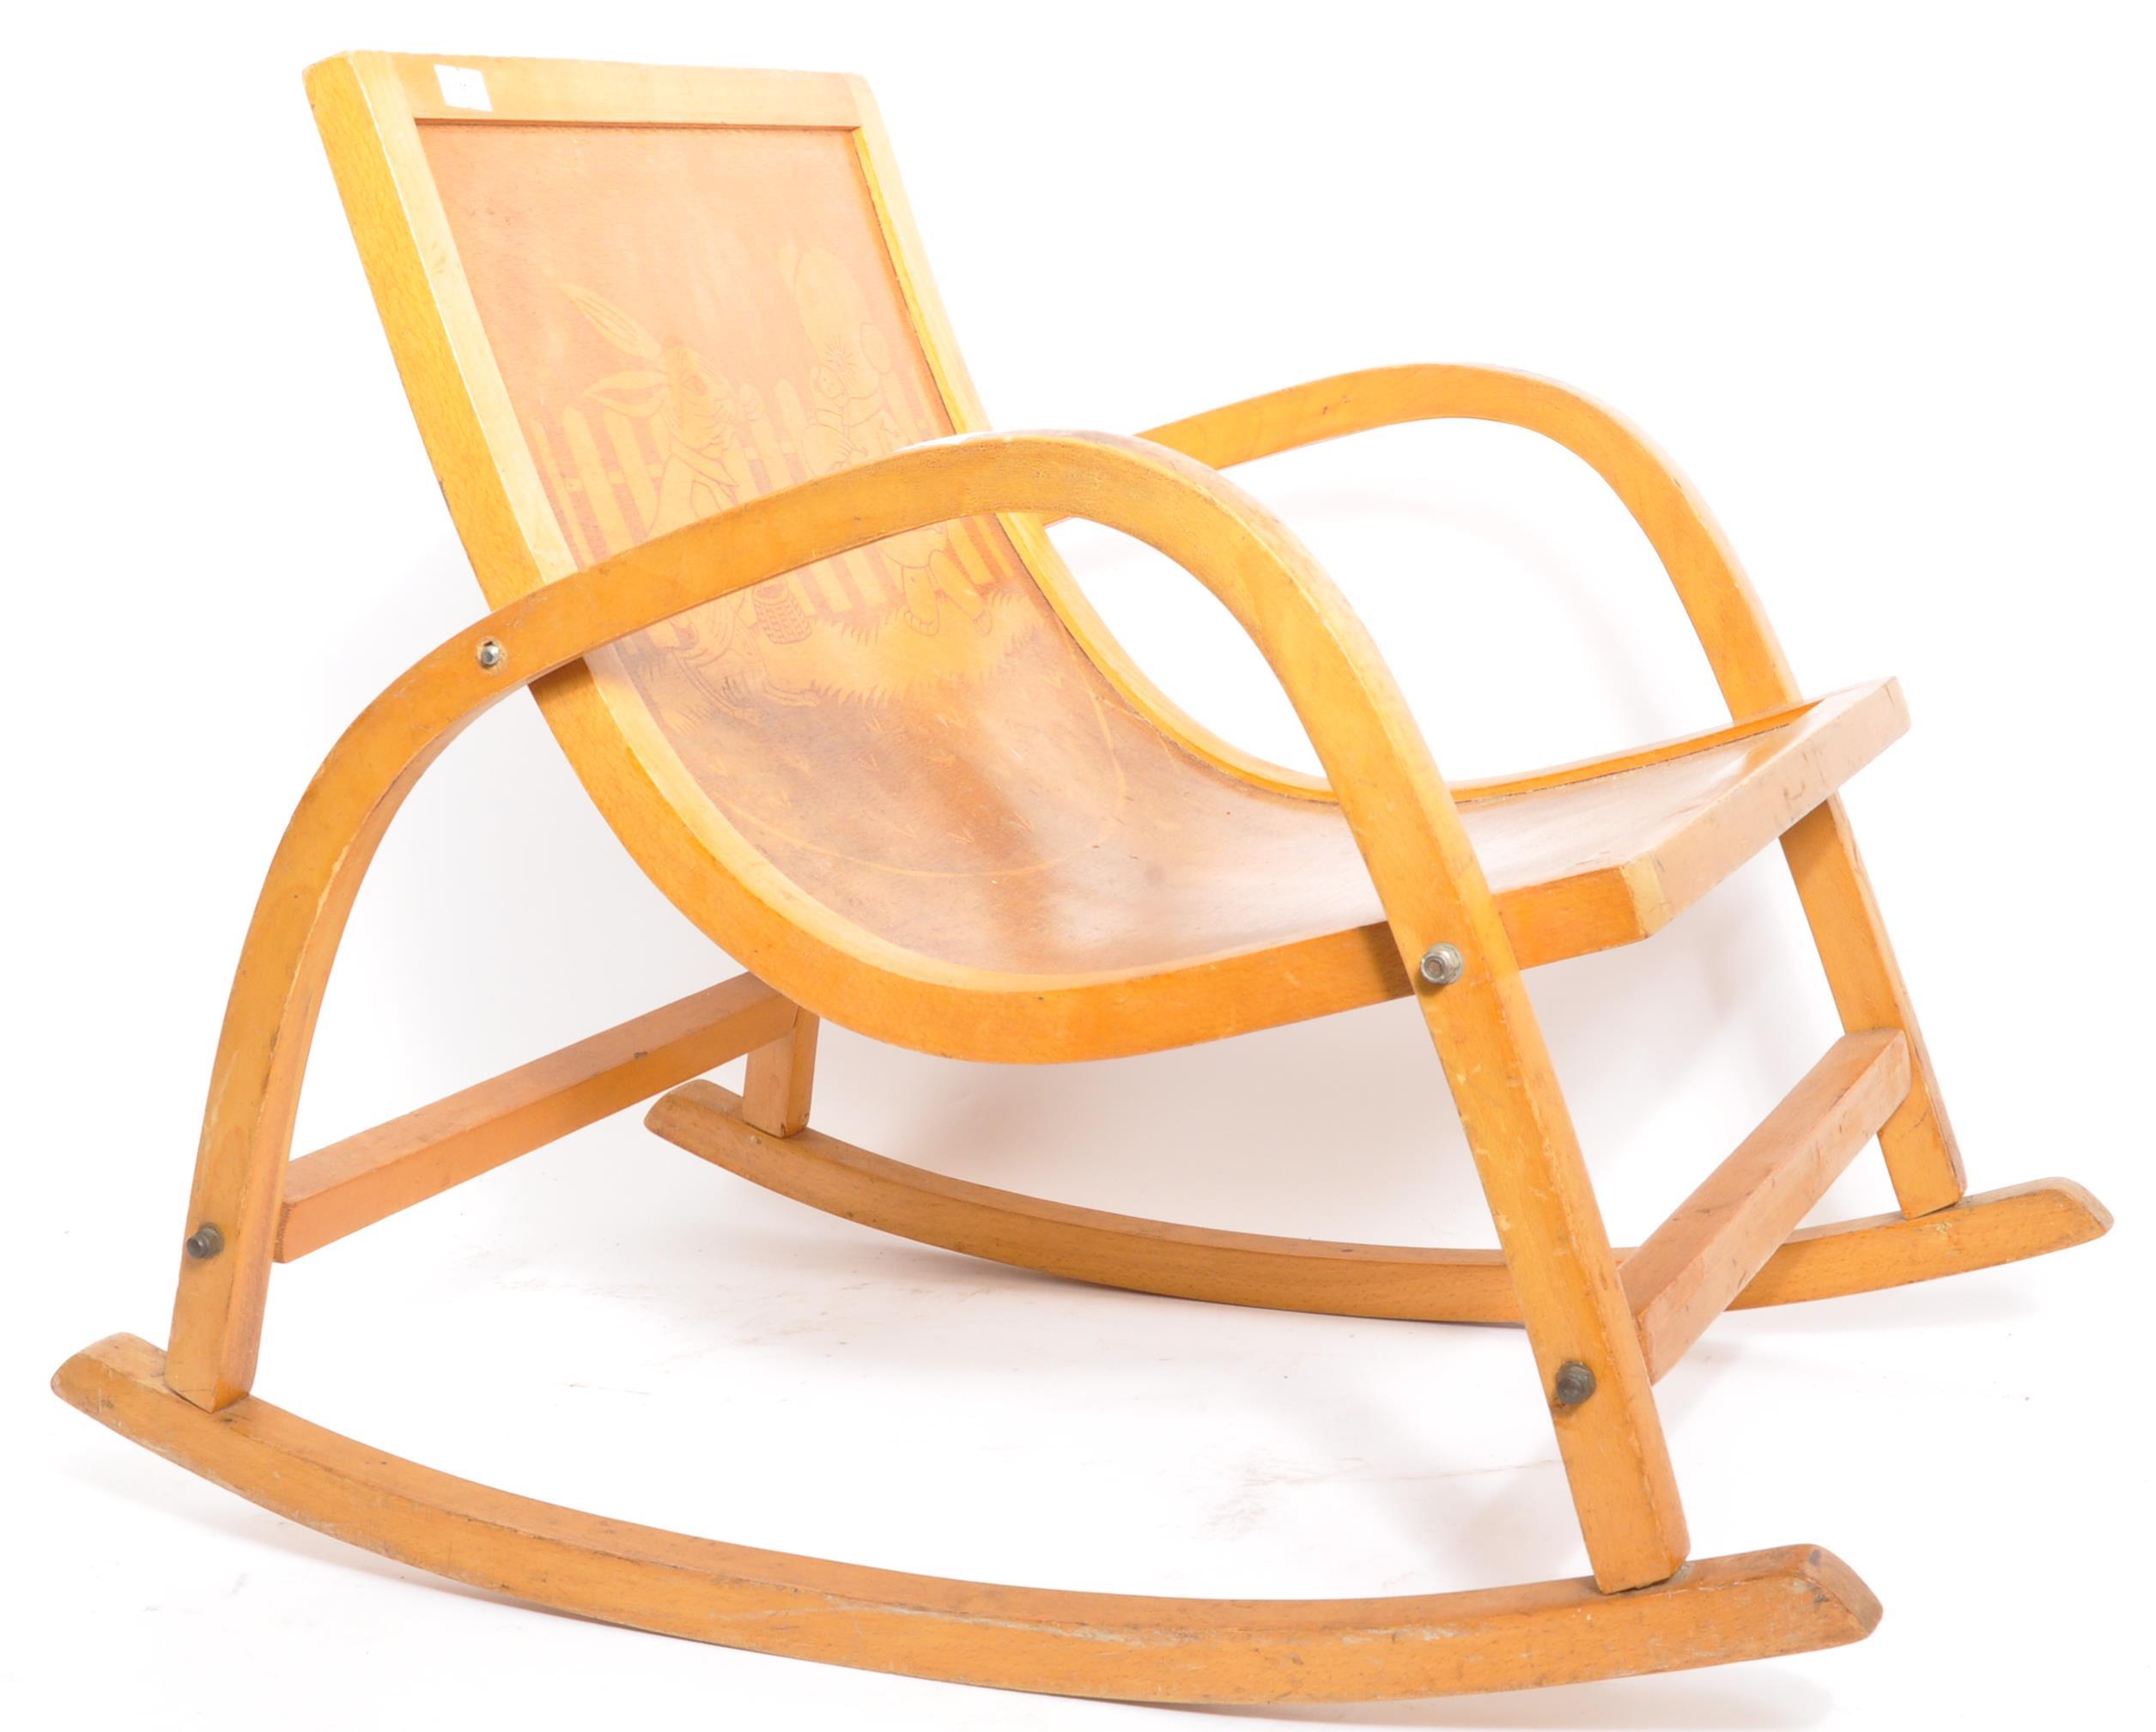 VINTAGE BENTWOOD CHILDRENS ROCKING CHAIR - Image 6 of 7